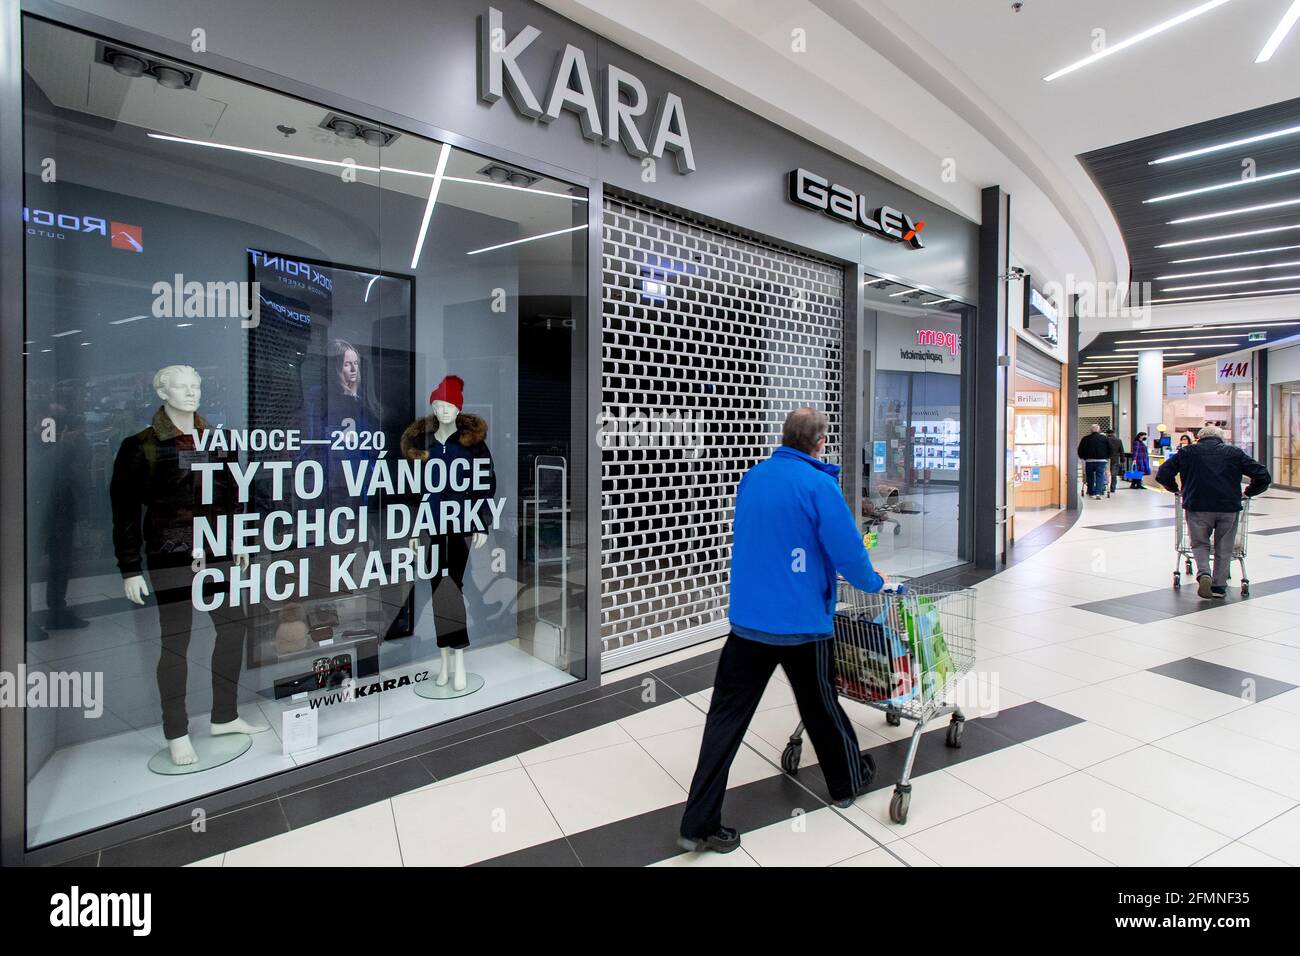 Creditors of leather fashion producer and retailer Kara Trutnov approved  reorganisation as the solution to the firm's insolvency at today's regional  court session, with the reorganisation plan to be drafted by the